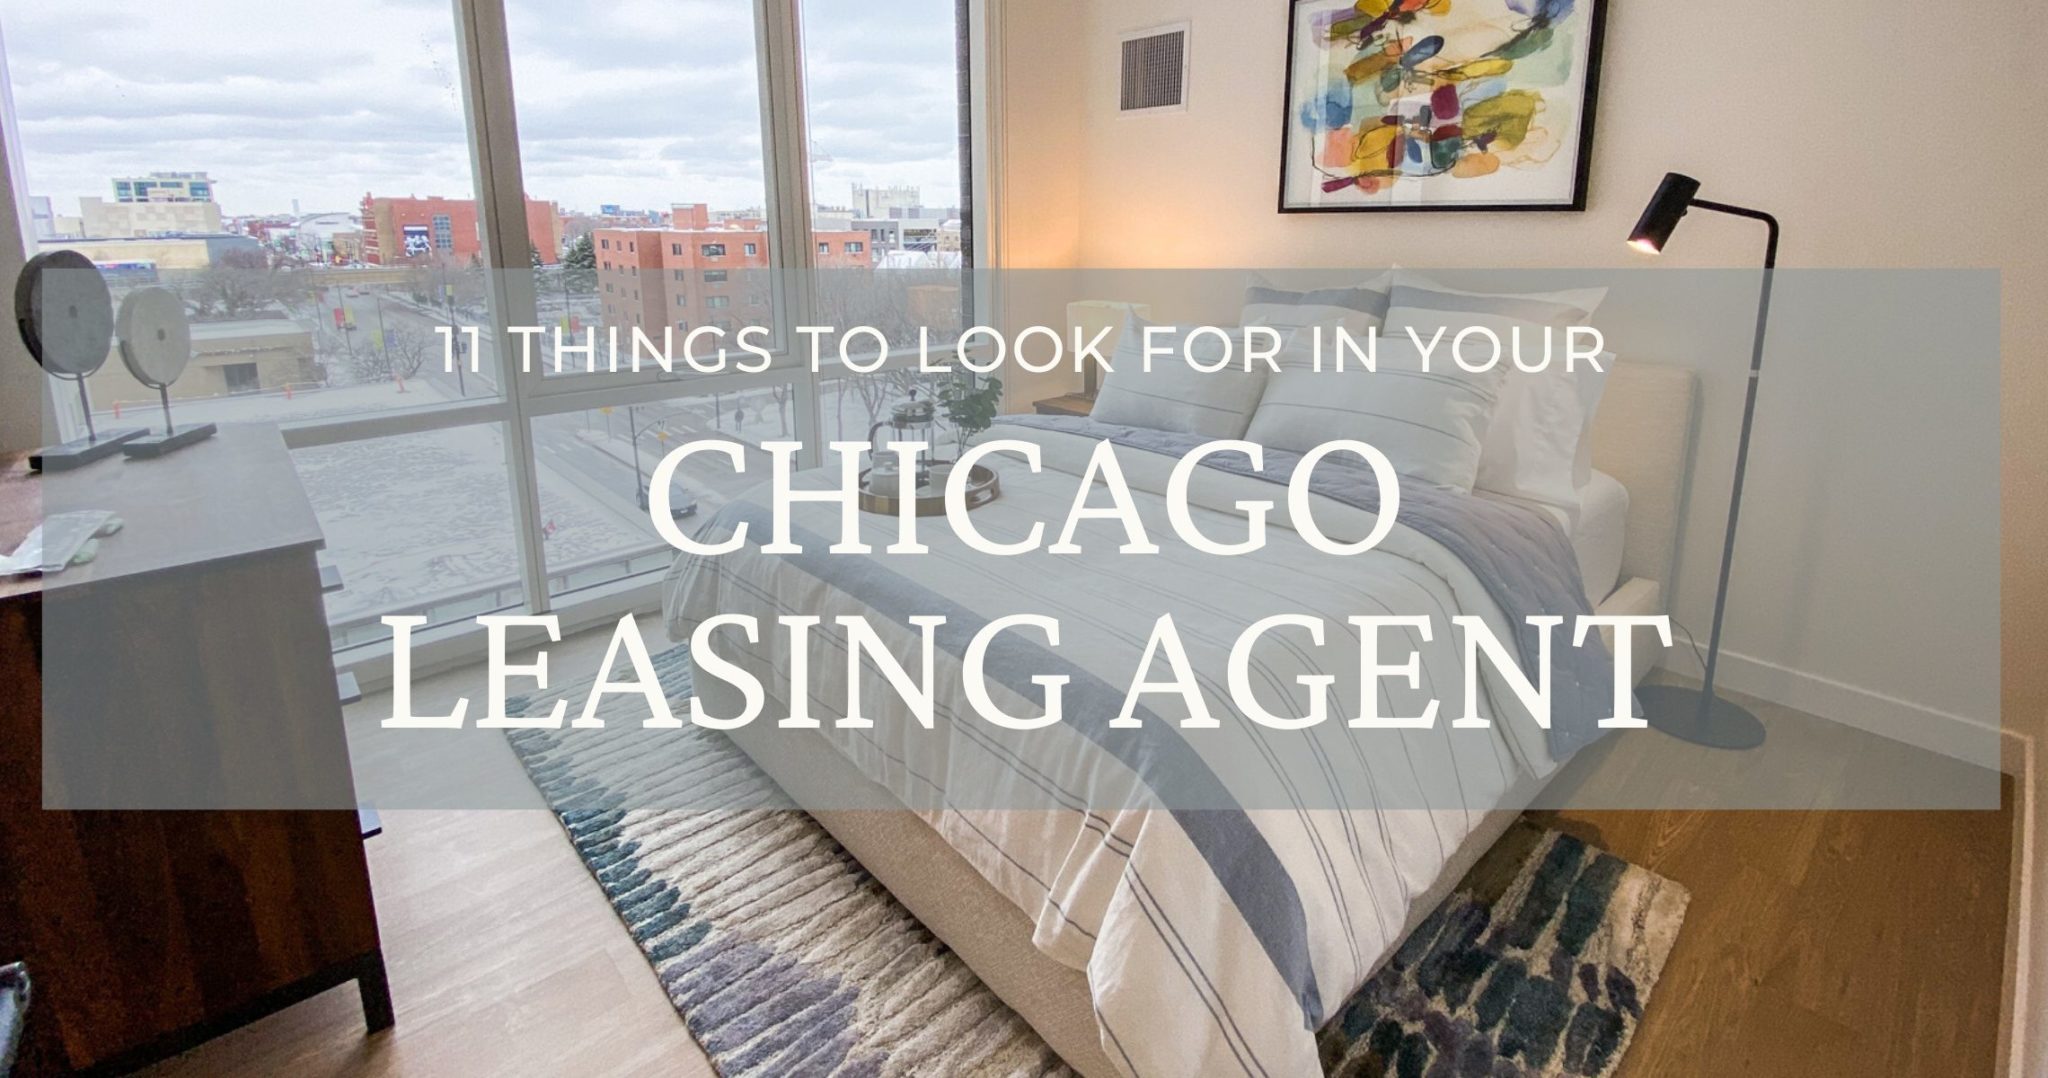 11 things you should look for in your Chicago leasing agent